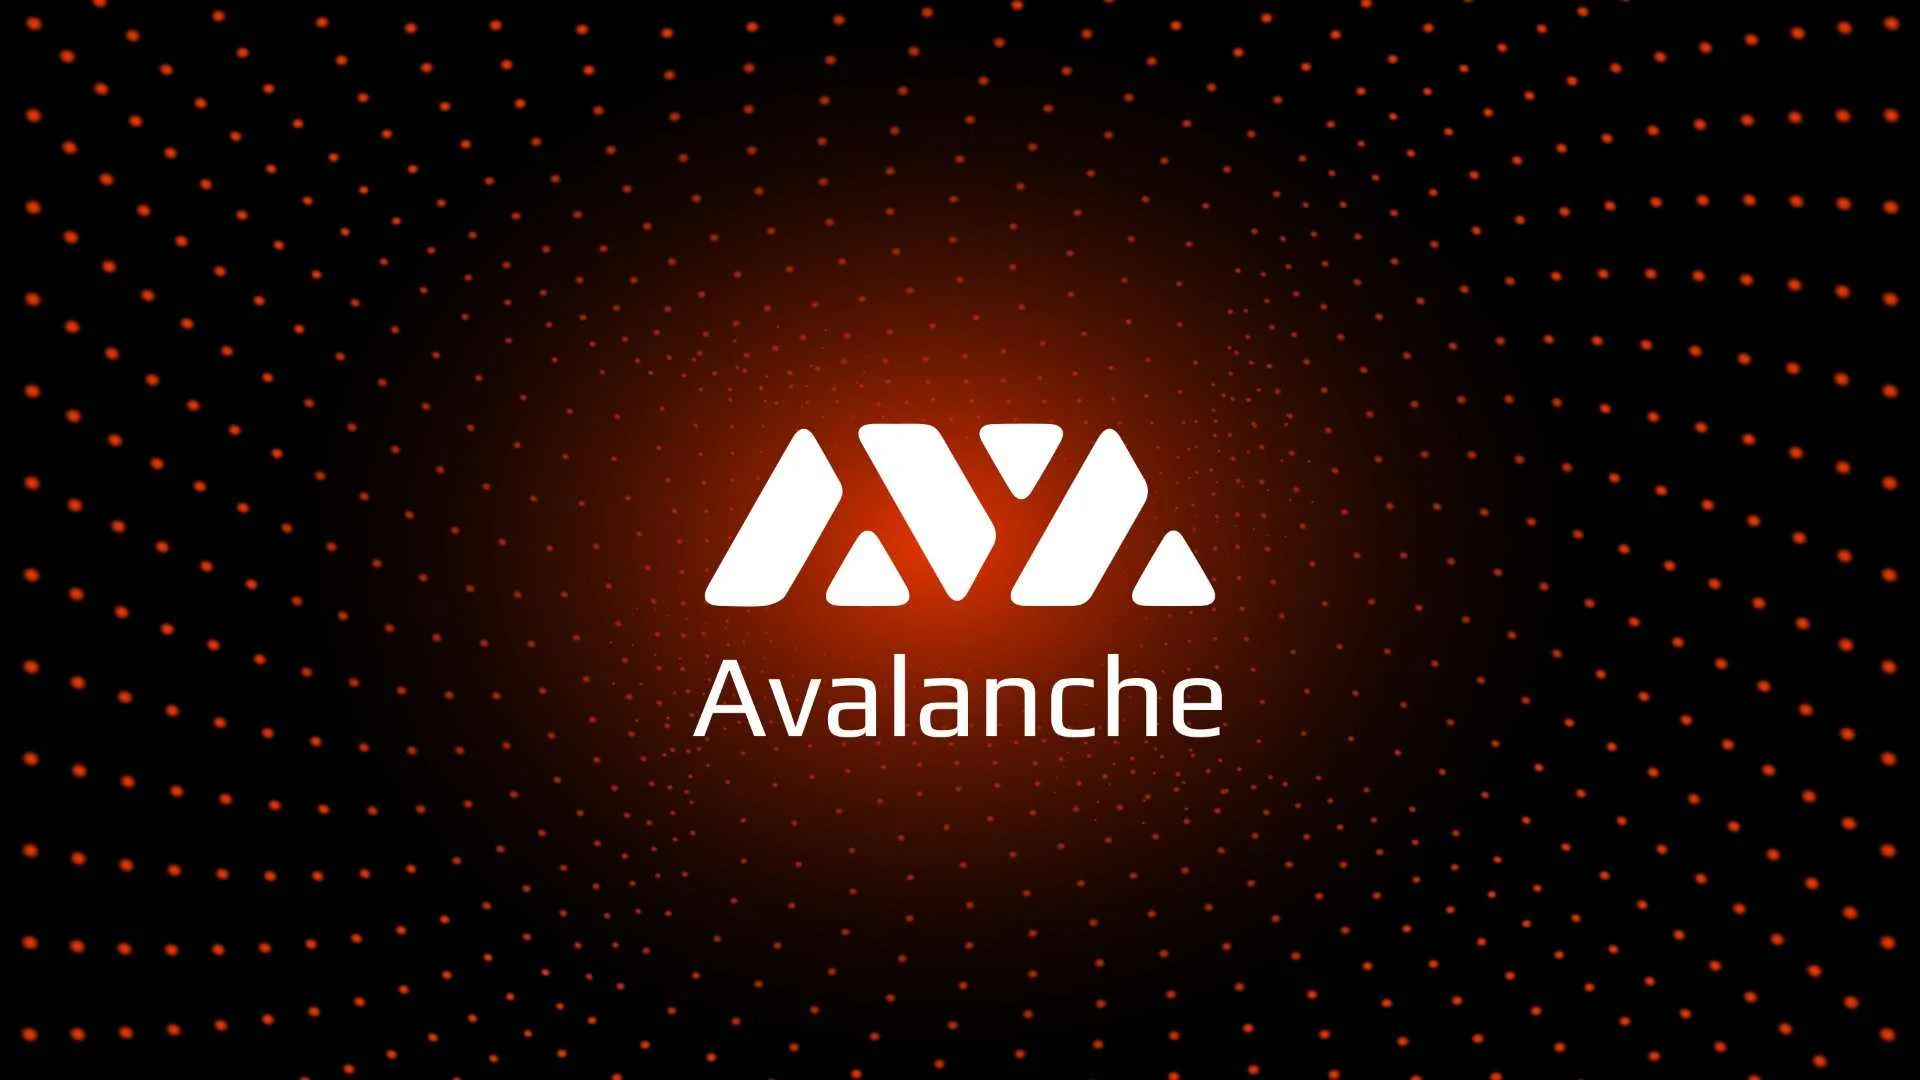 Avalanche (AVAX) Price Forecast for 2023: Can it Reach $100?